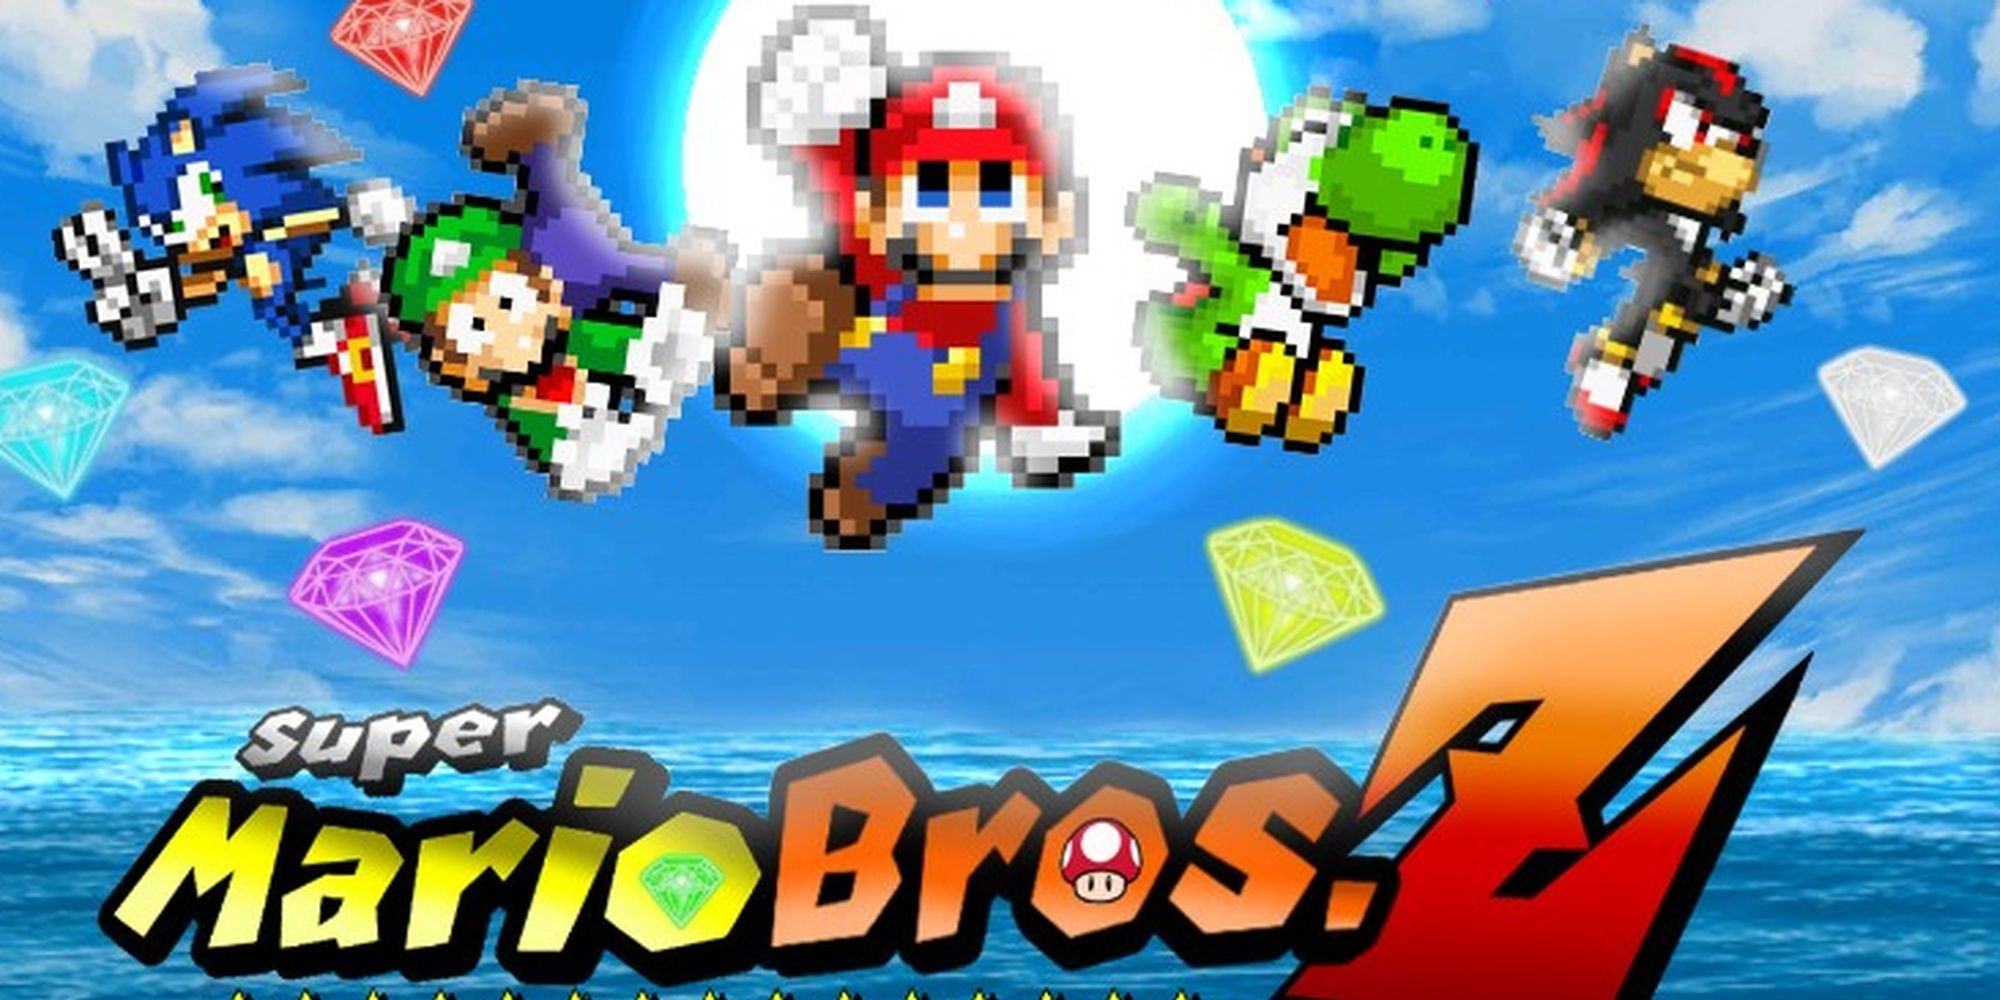 The characters in fan project Super Mario Bros. Z